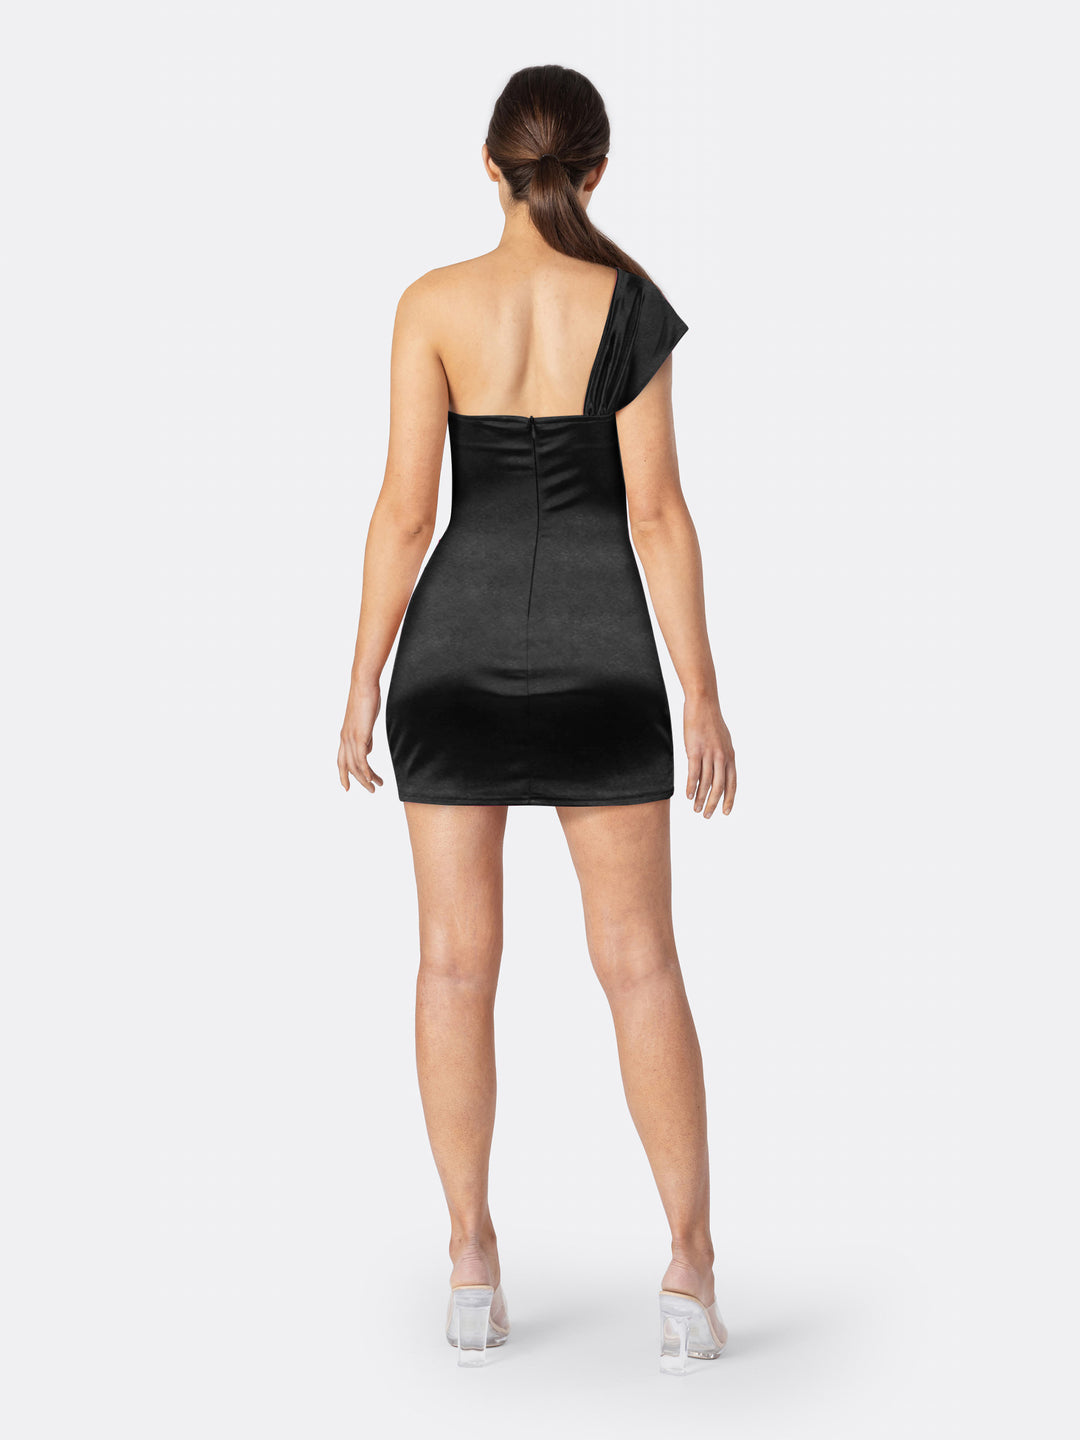 Single Shoulder Mini Dress with Irregular Solid Color Wrapped Chest and High Waist Slim Black Back | Jolovies